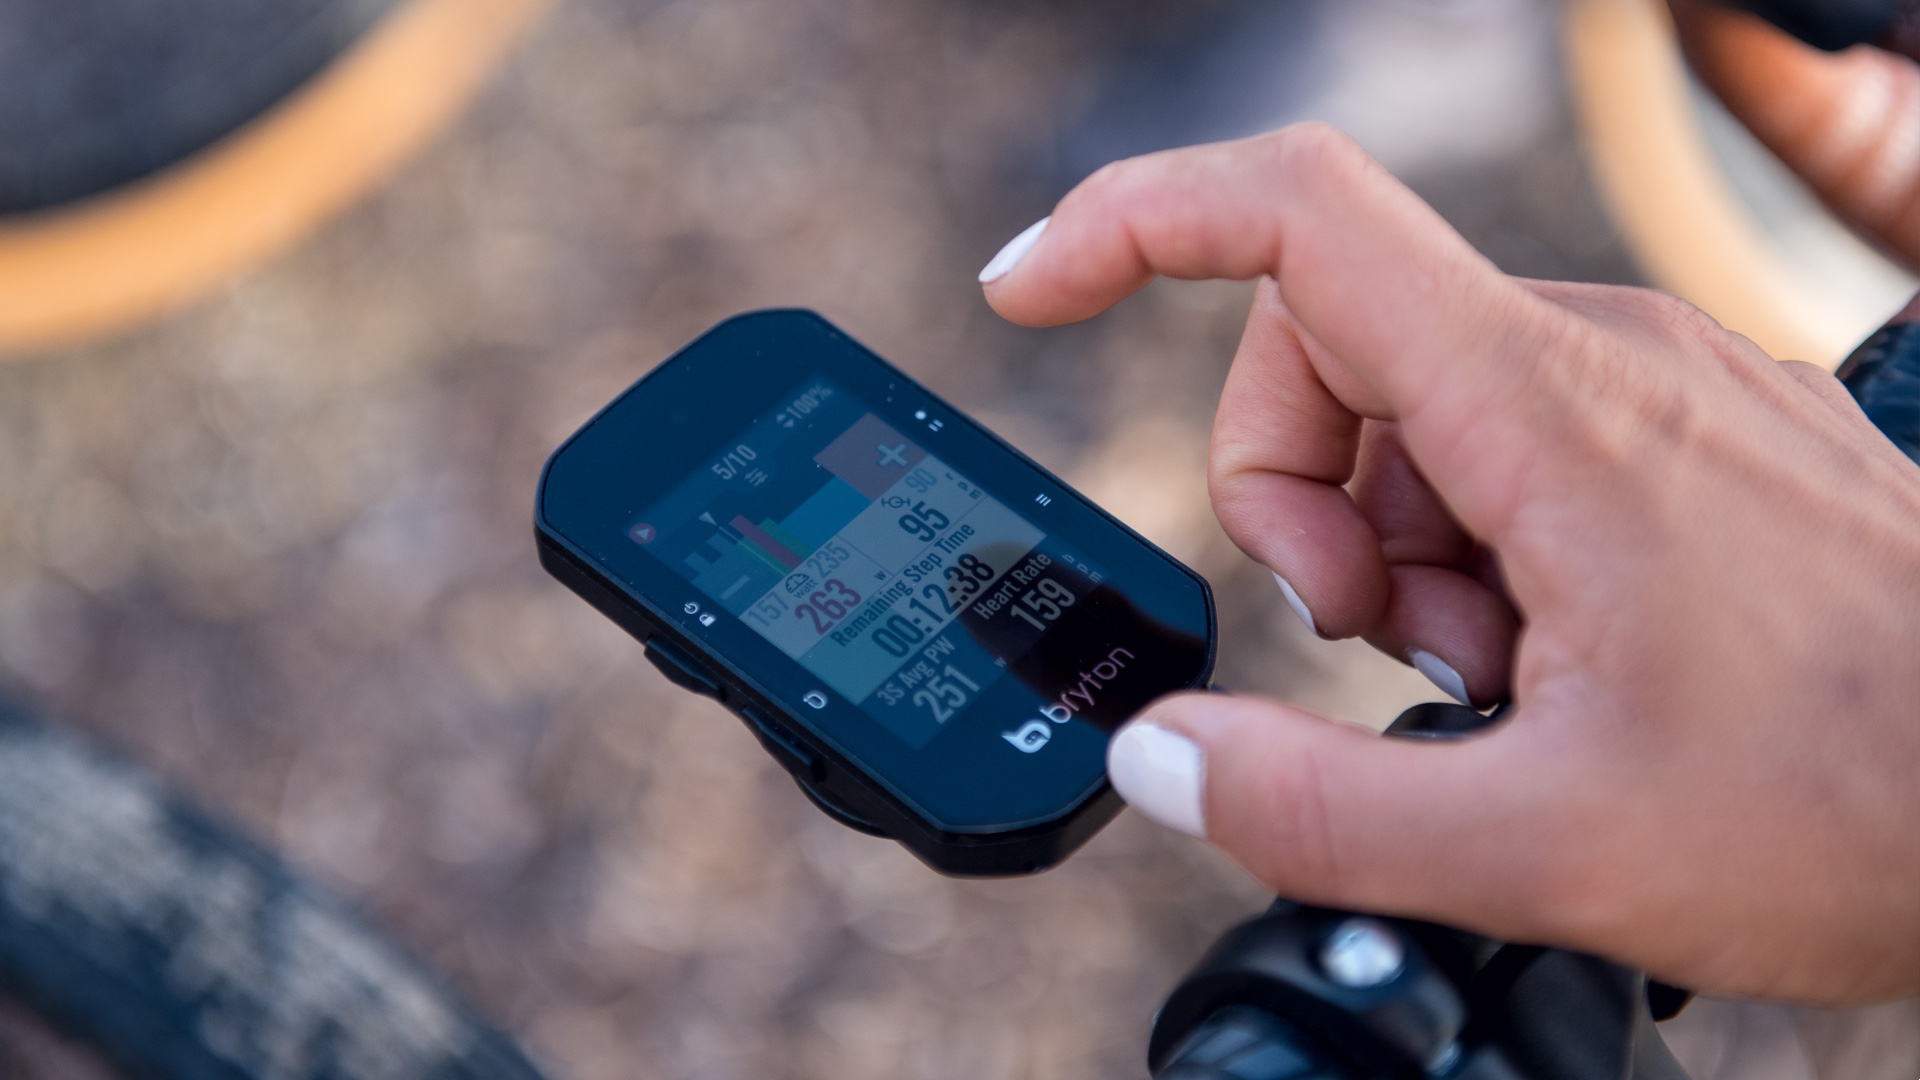 Bryton Rider S500 Bike GPS First Ride Thoughts